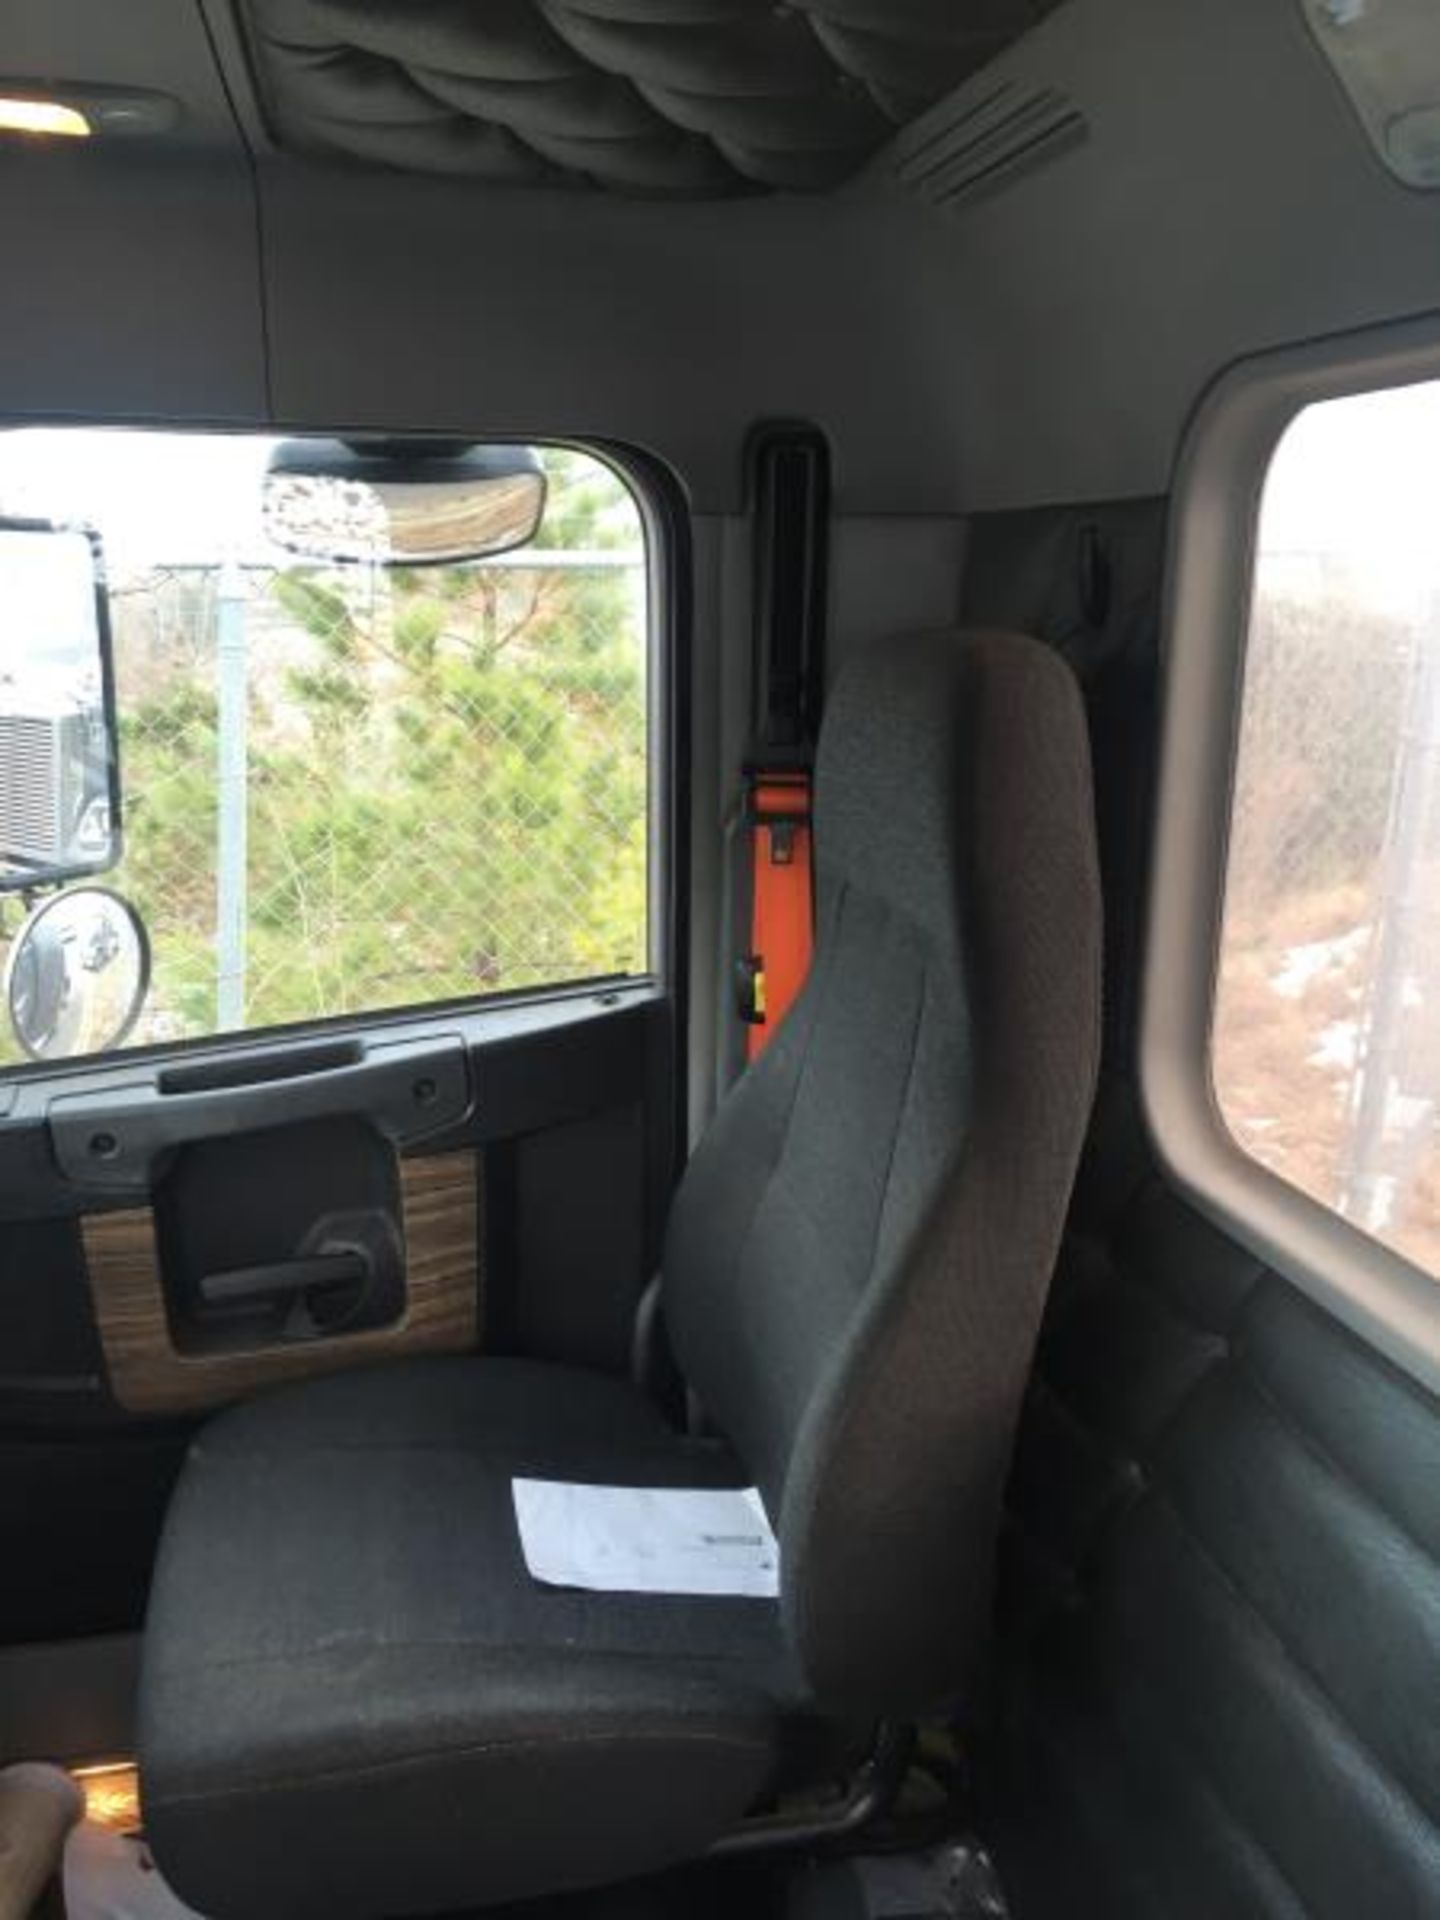 2017 Freightliner 122SD, 167,909 Miles - Image 18 of 28